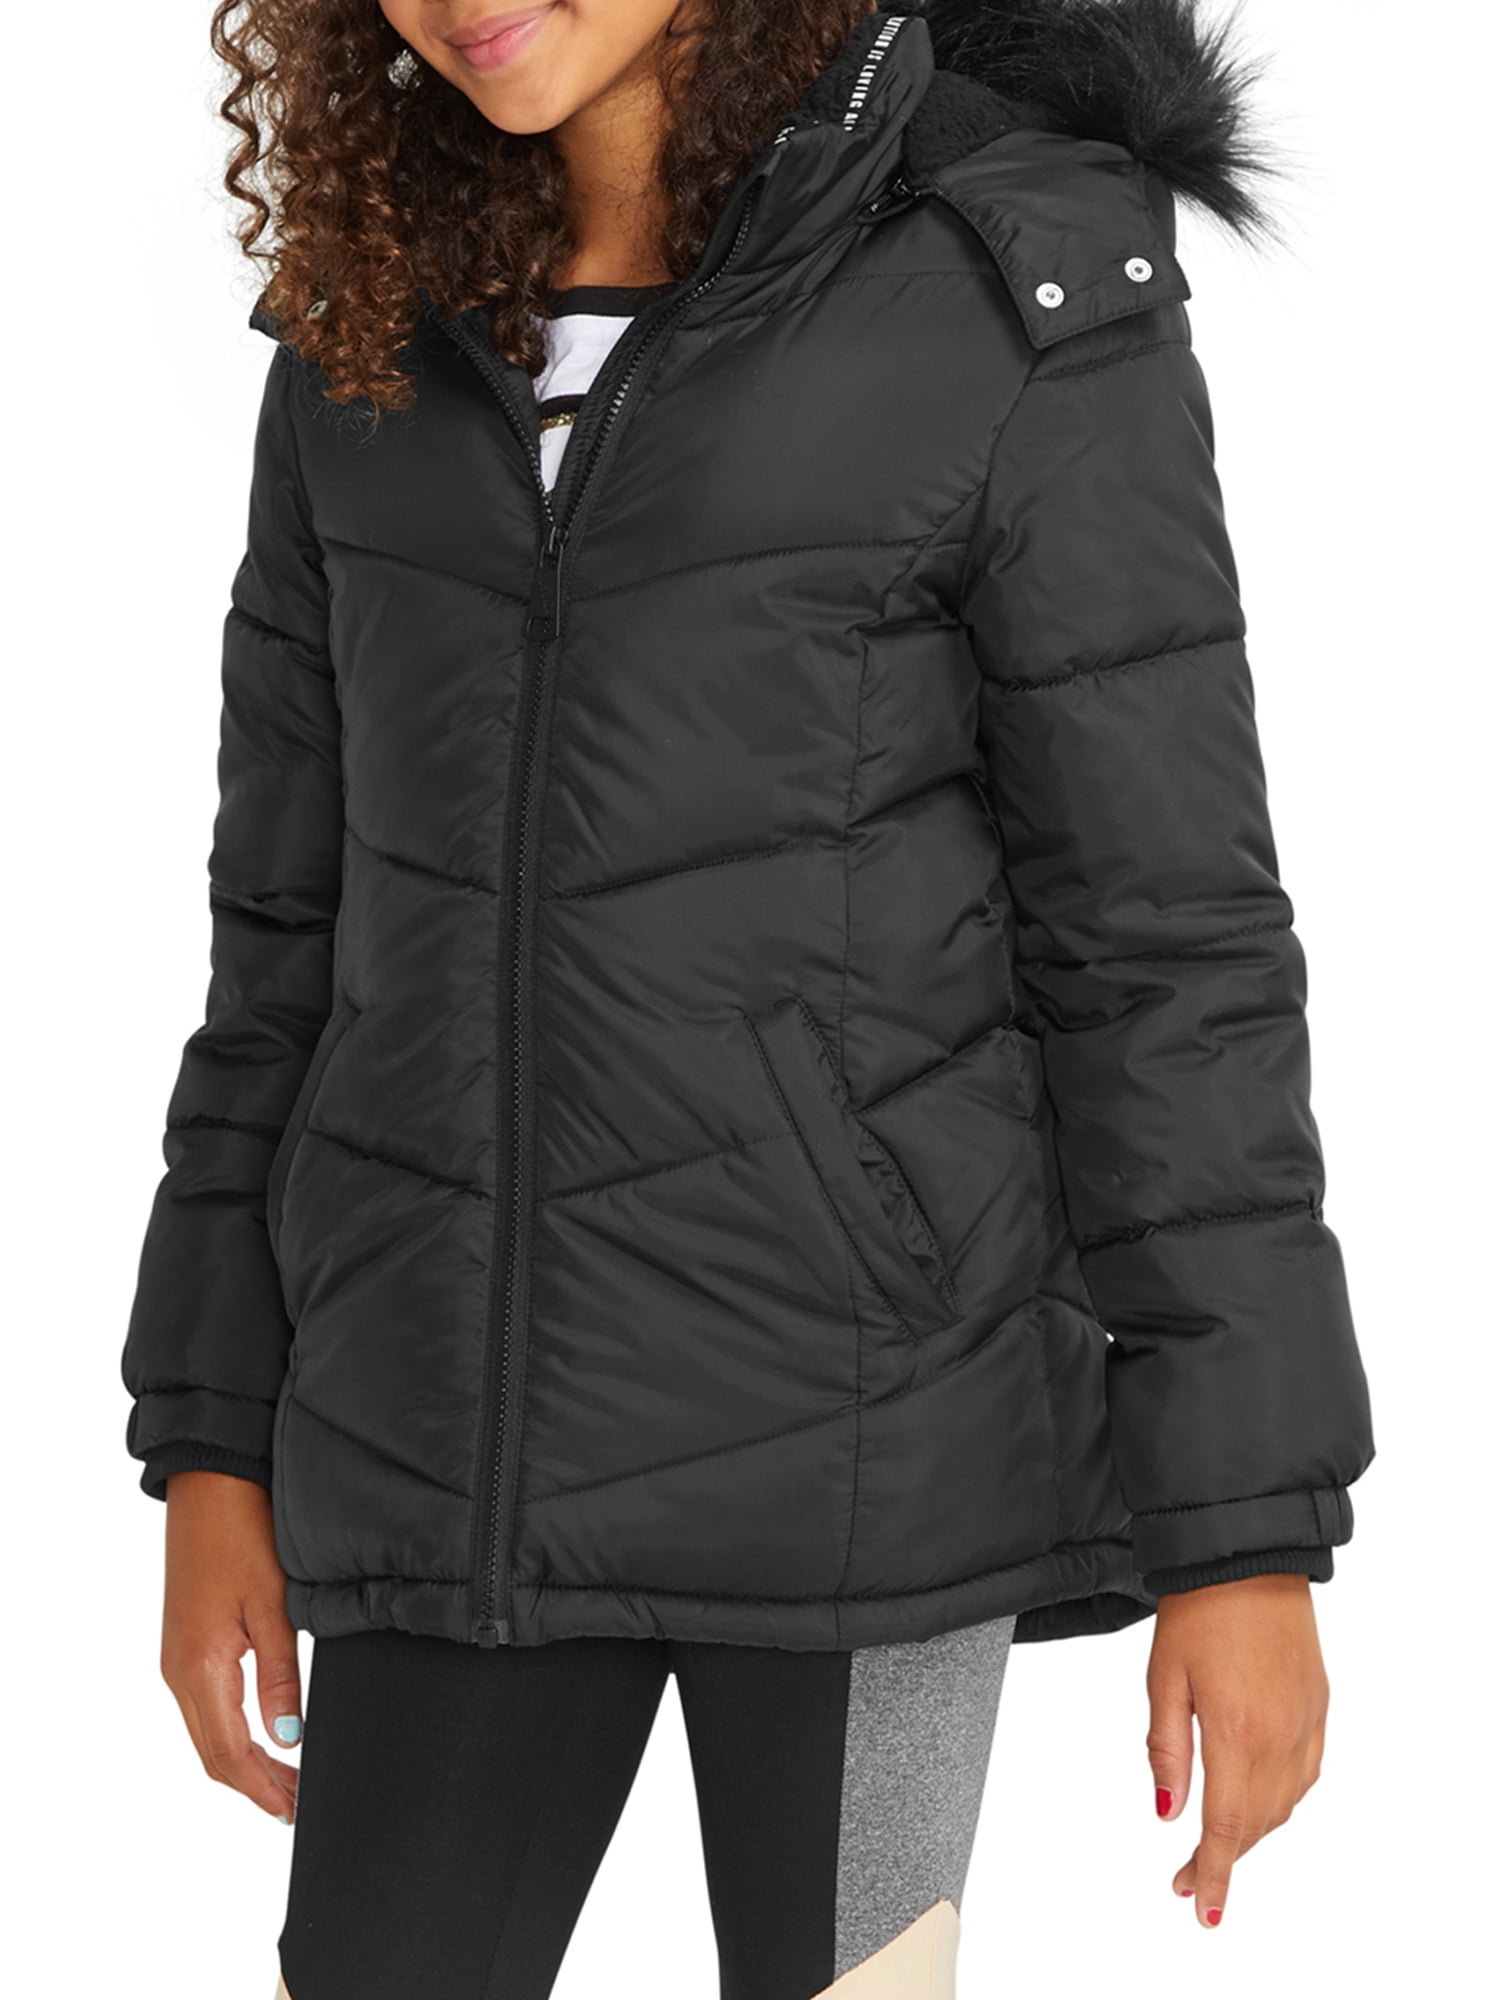 ROXY Girls Only Love Hooded Puffer Jacket for Girls 4-16 Hooded Puffer Jacket 